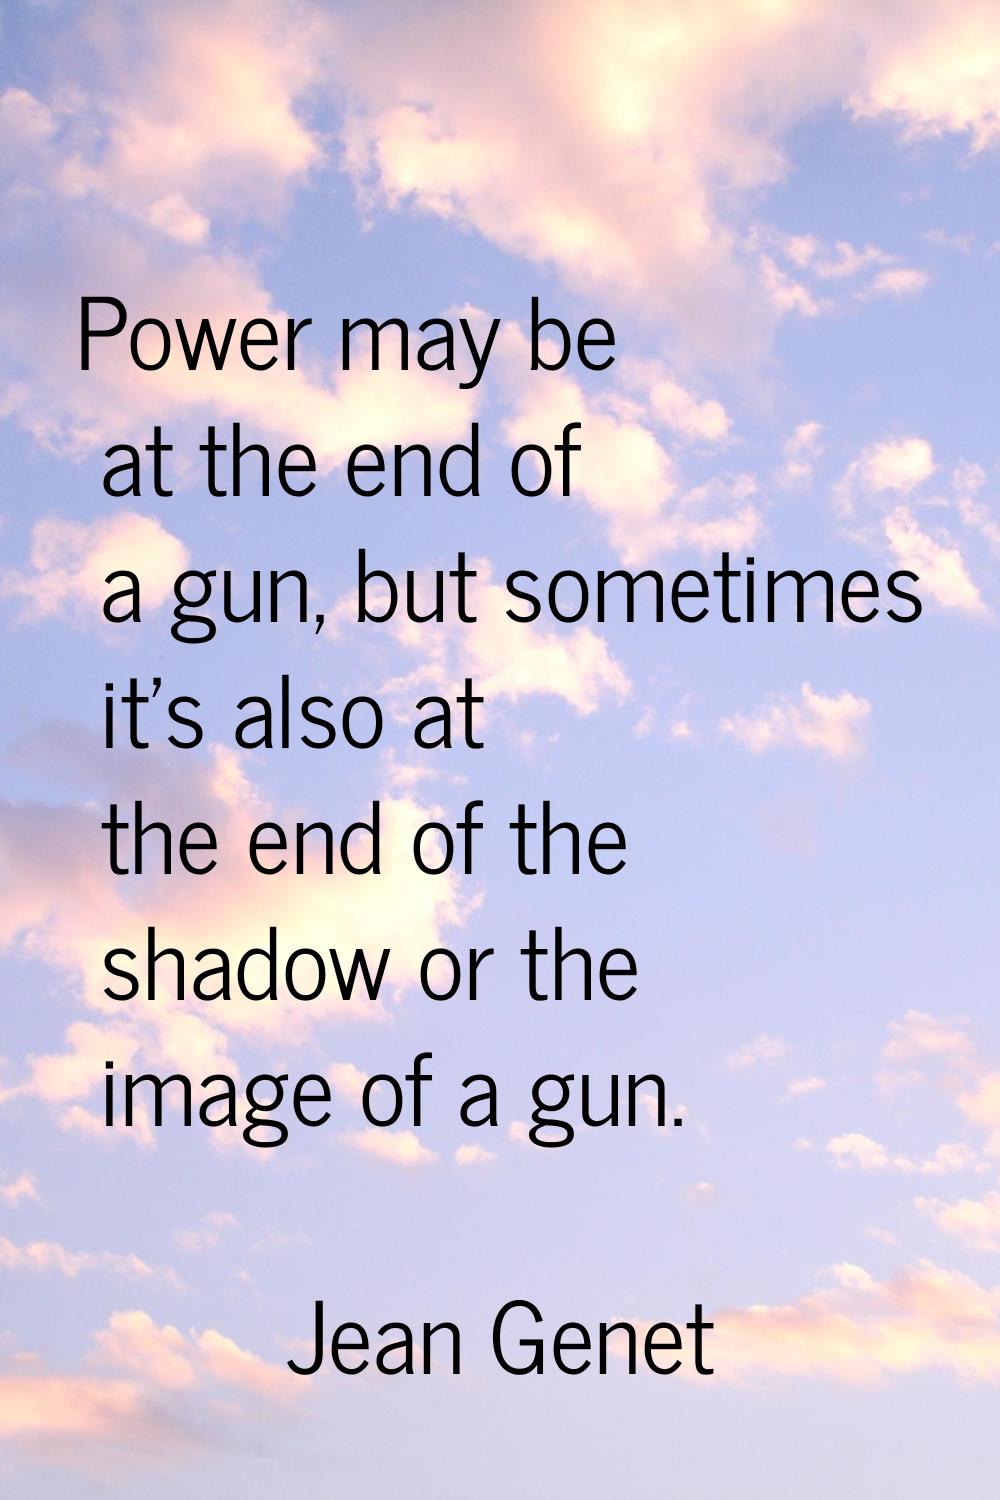 Power may be at the end of a gun, but sometimes it's also at the end of the shadow or the image of 